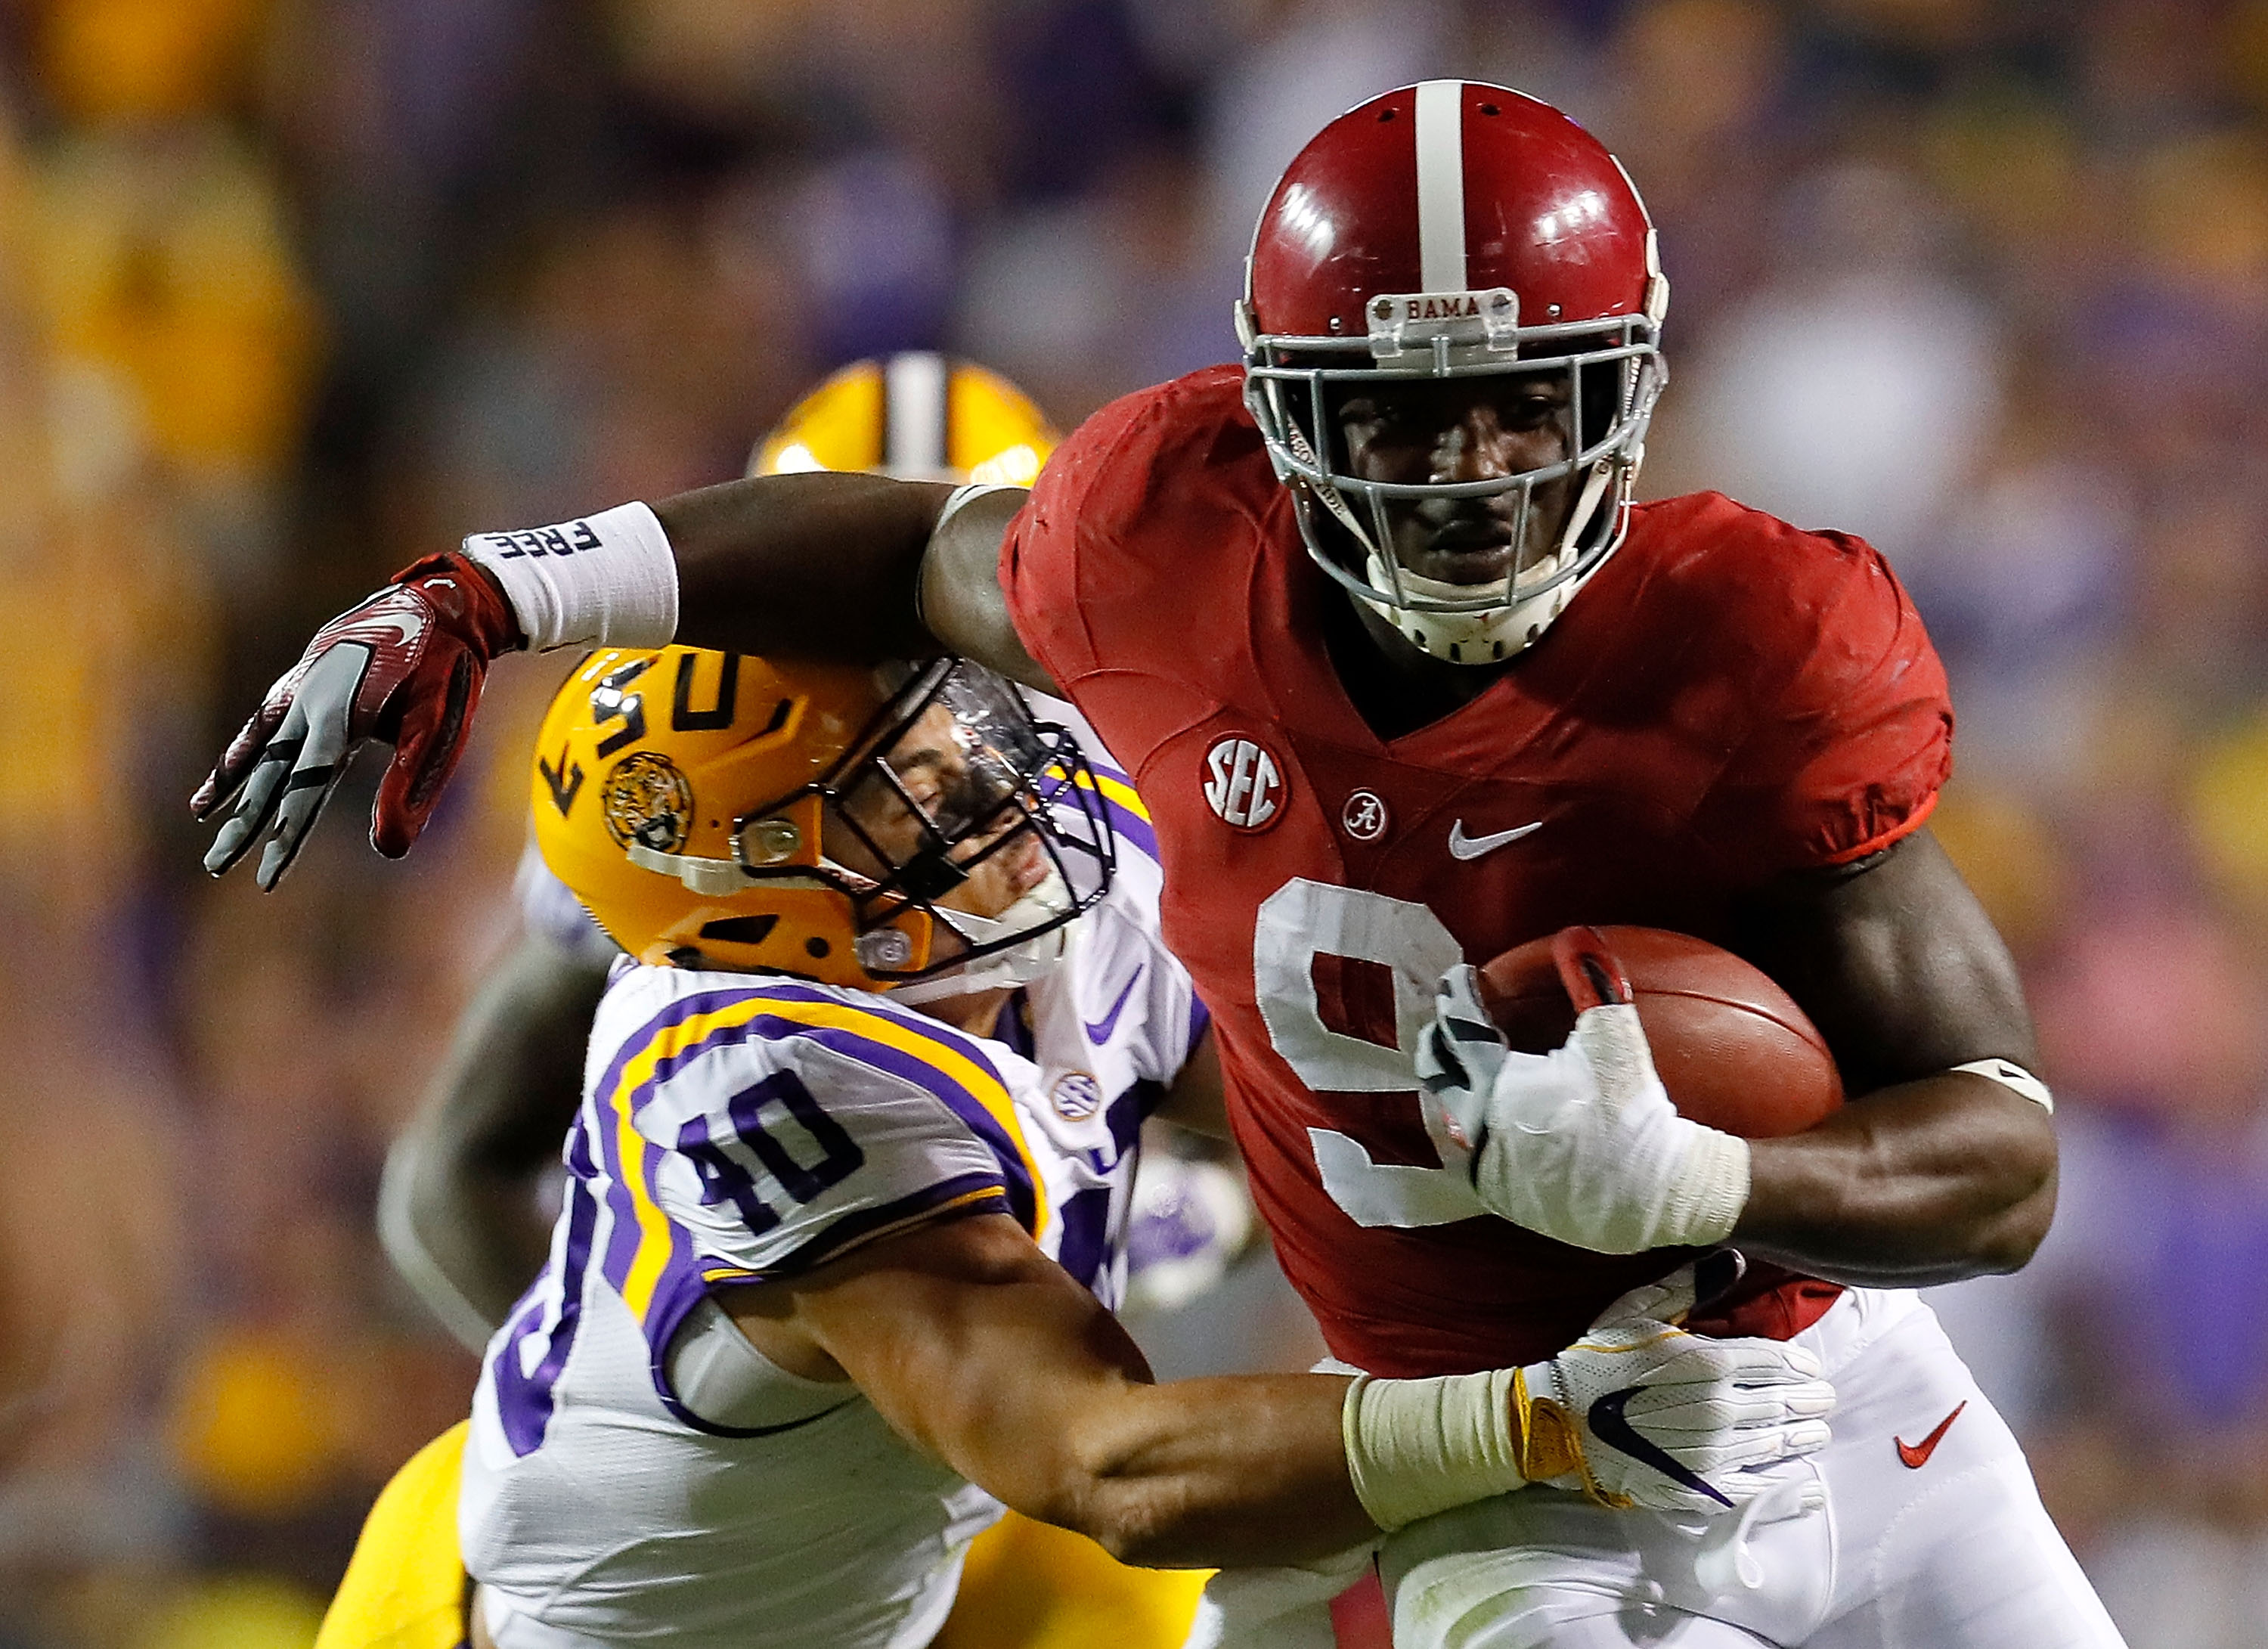 bo scarbrough, bo scarboro, joe scarbrough, joe scarboro, who is alabama running back, nfl college stats, nfl draft, salary, michigan state, family, about, bio